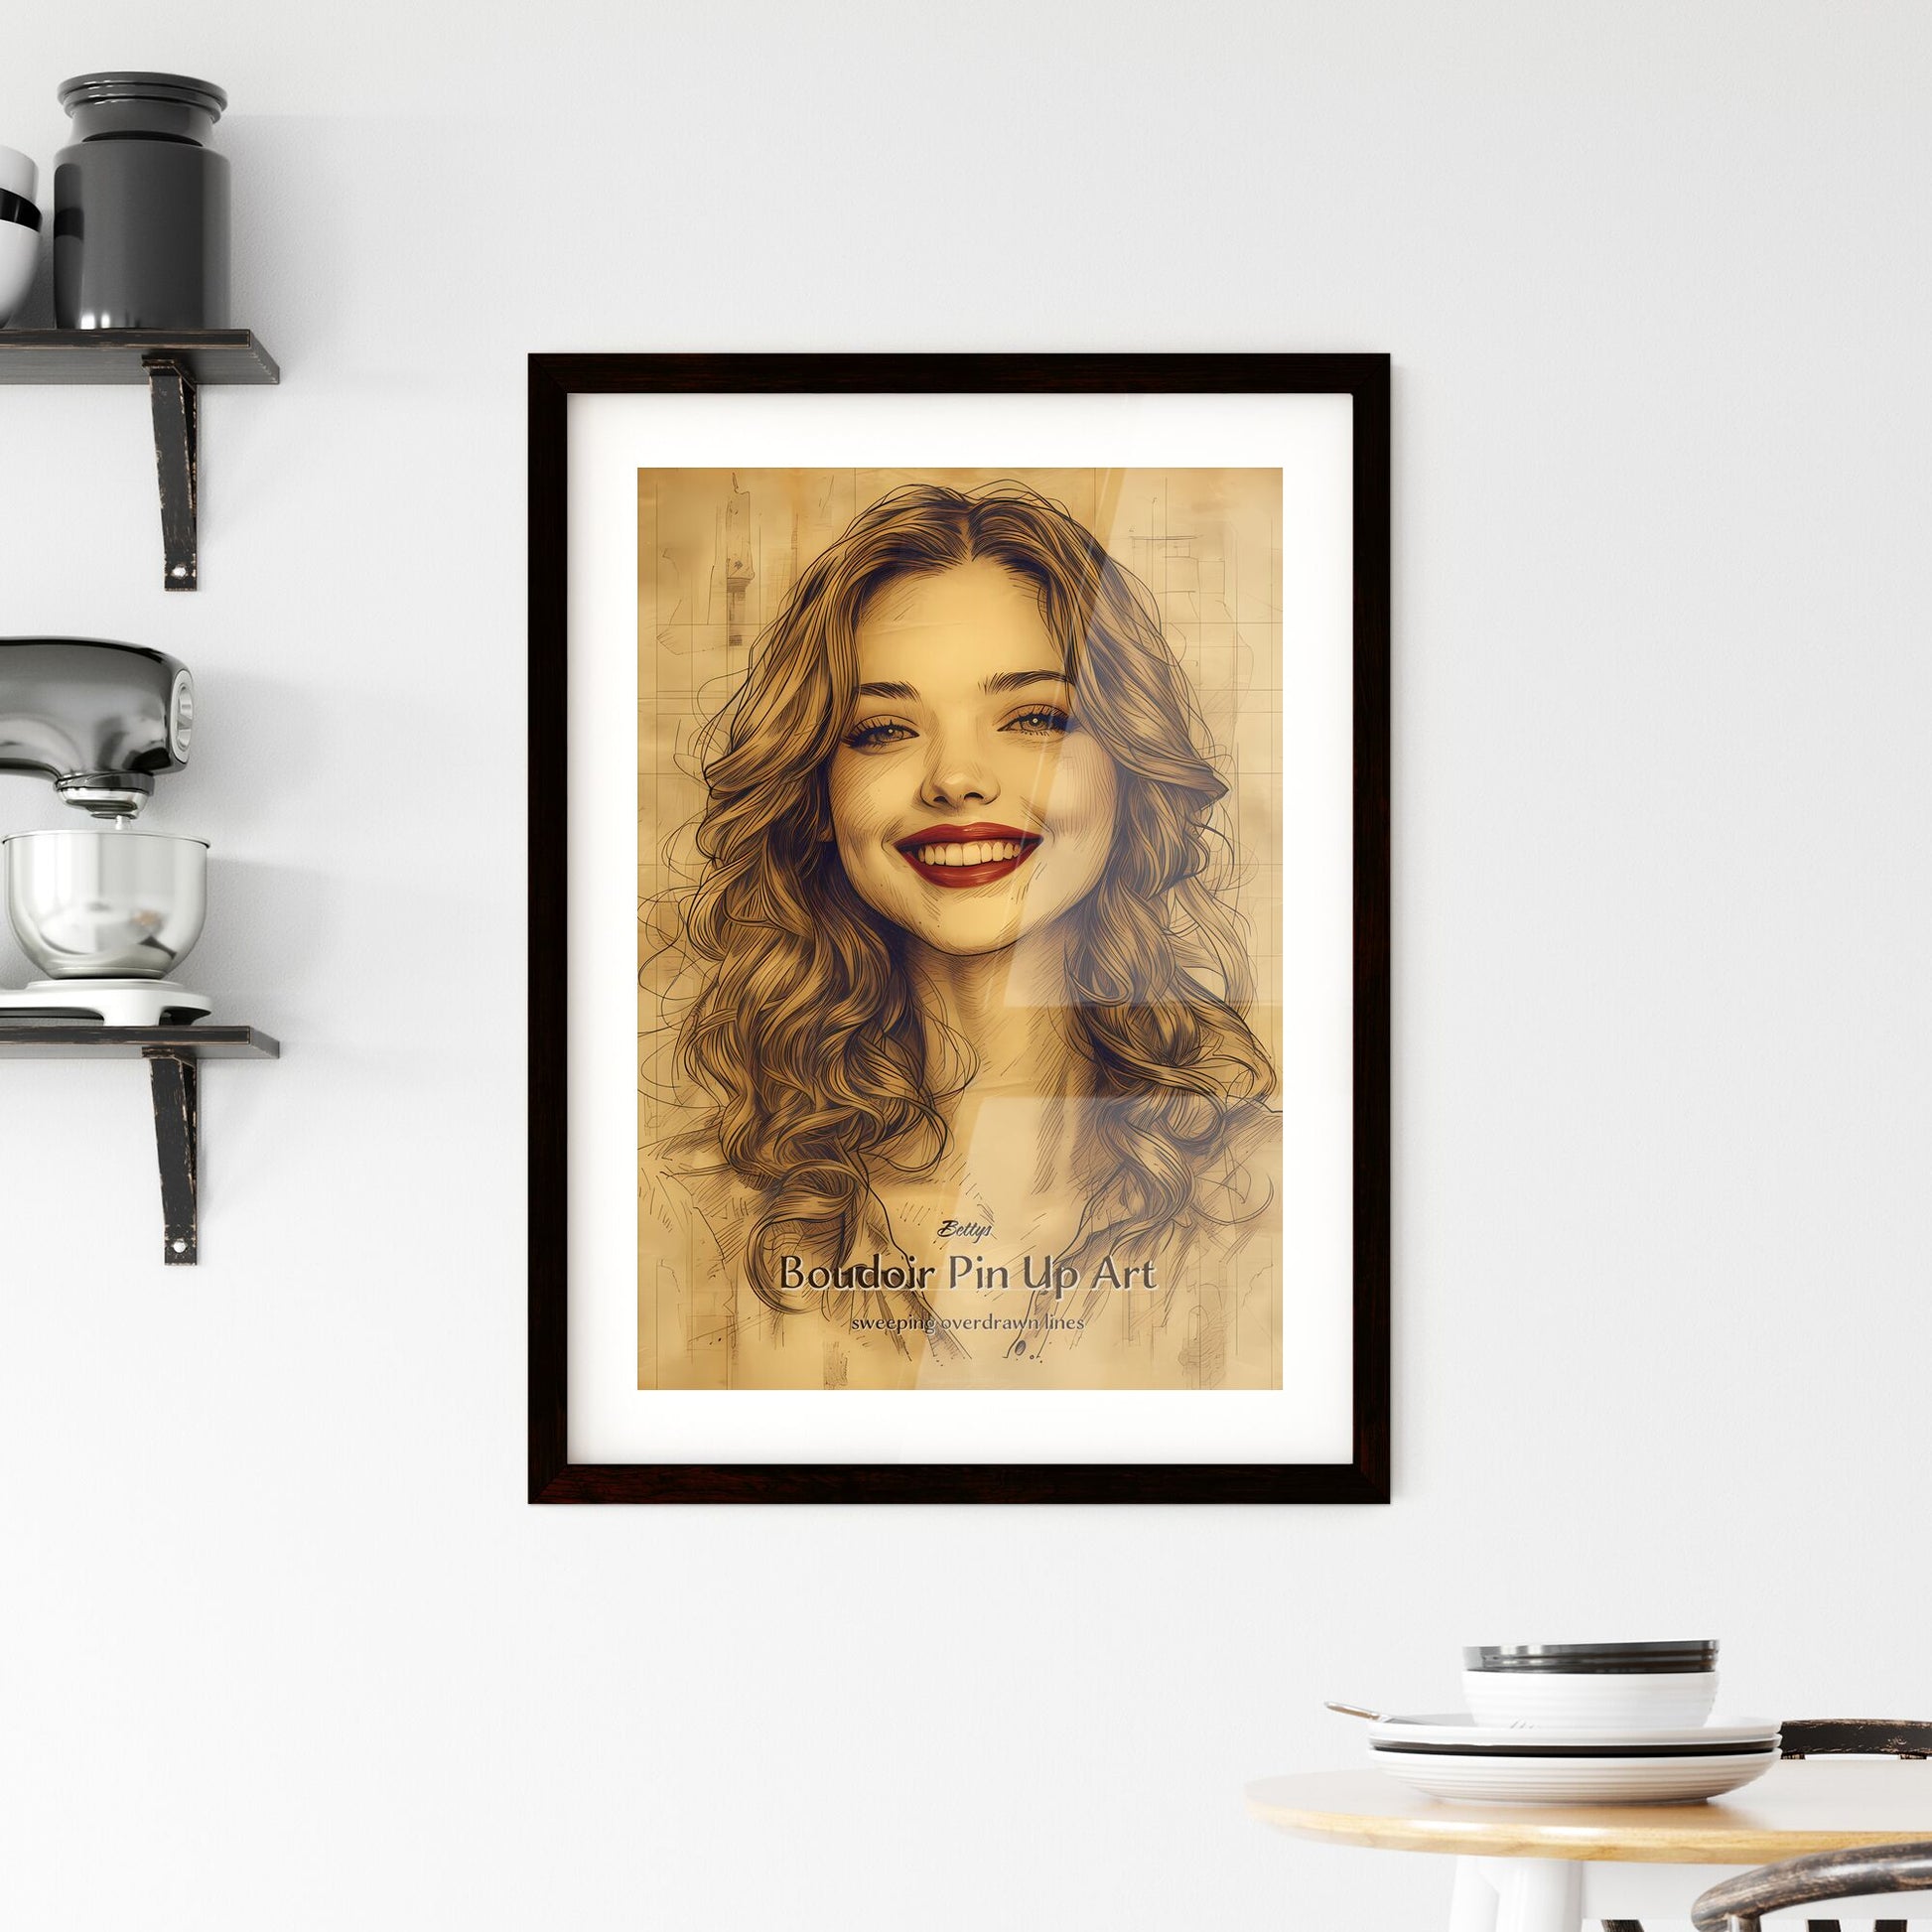 Bettys, Boudoir Pin Up Art, sweeping overdrawn lines, A Poster of a woman with long curly hair smiling Default Title